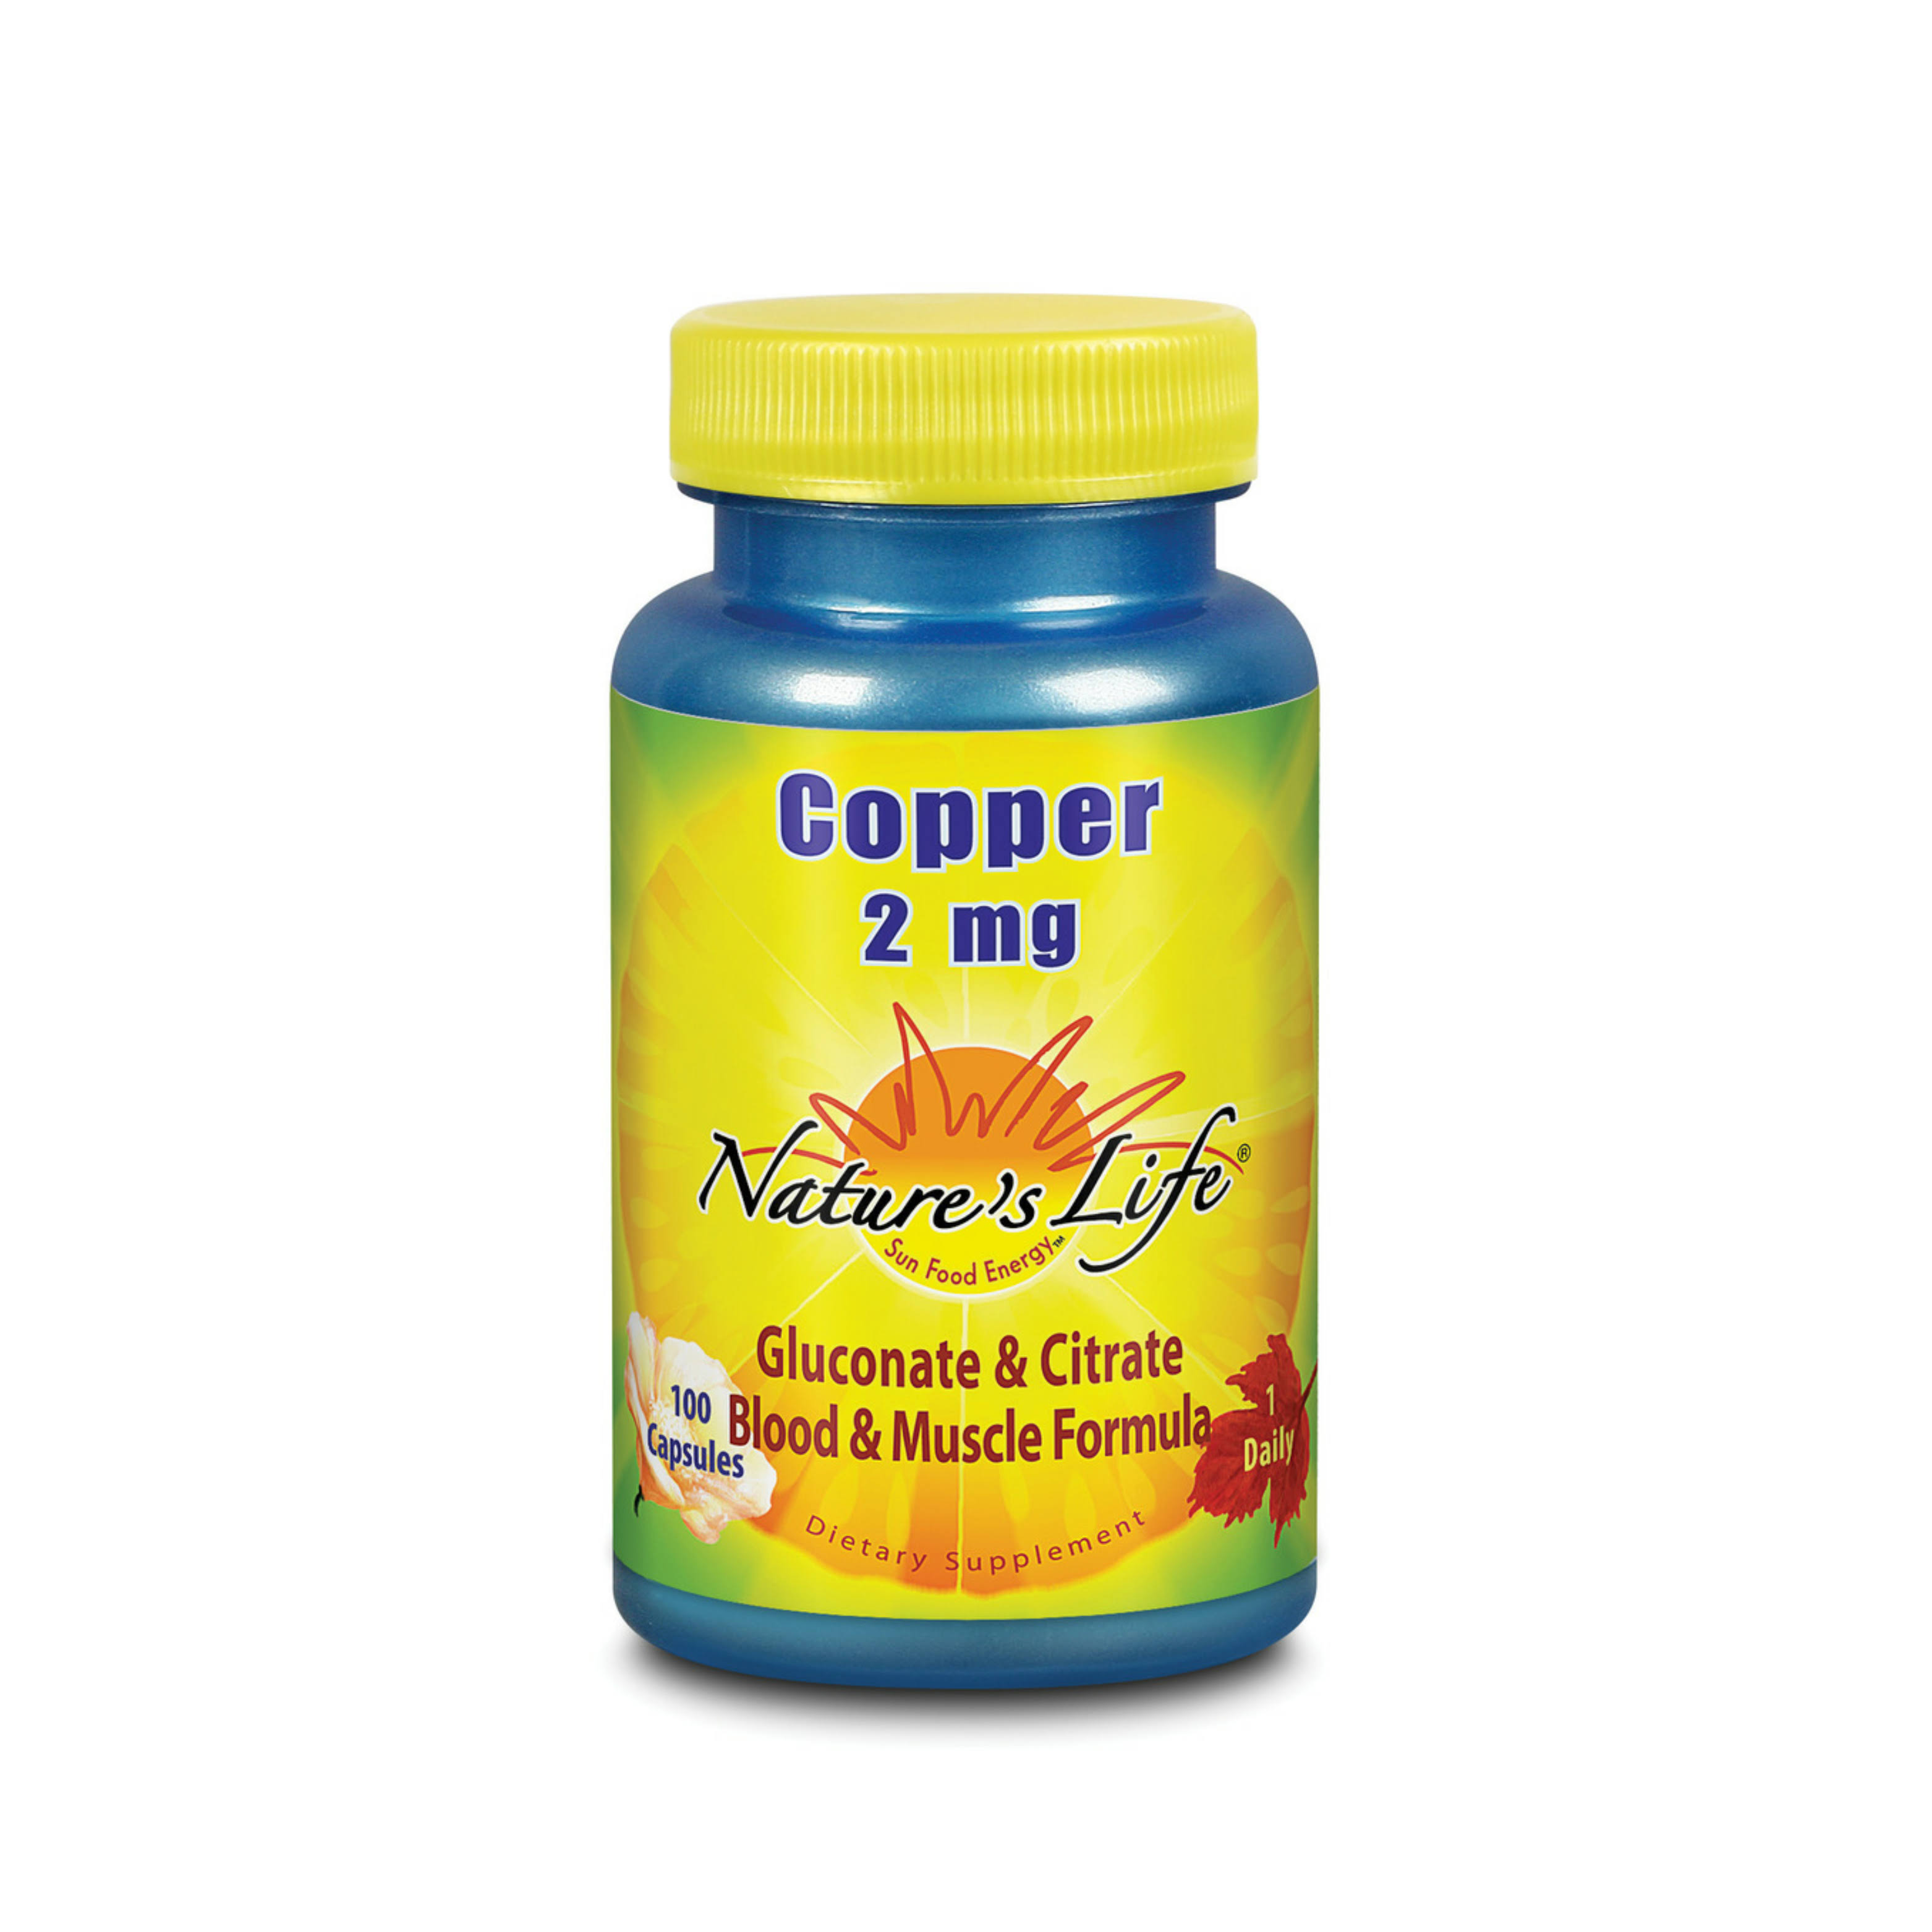 Natures Life Copper Complex Dietary Supplement - 2mg, 100ct